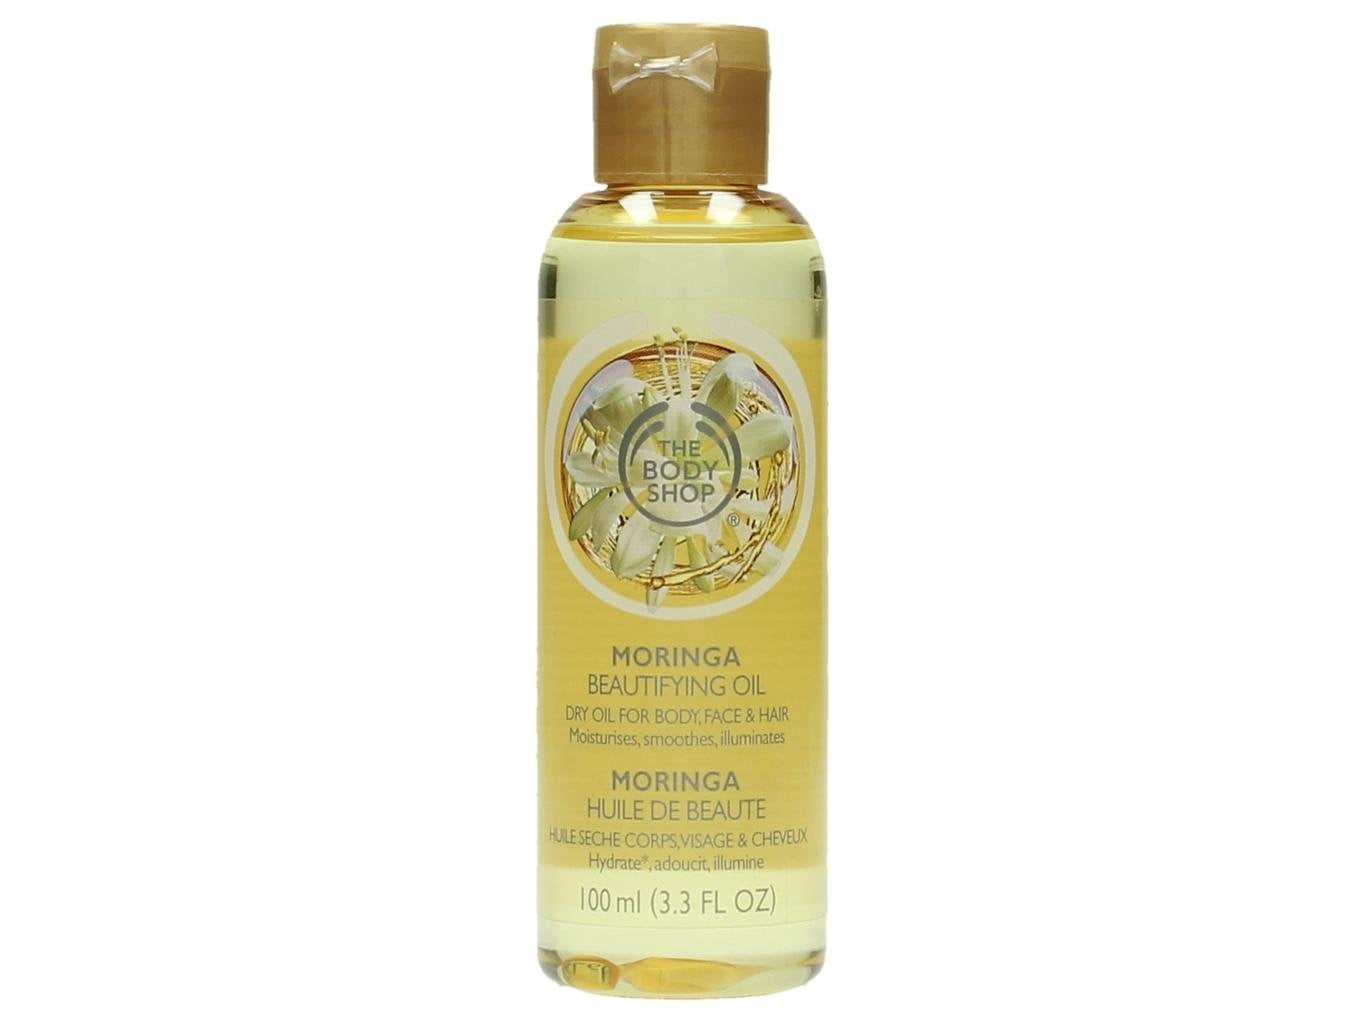 THE BODY SHOP Moringa Beautifying Oil 3.3 oz for body, face, and hair 100ml  NEW - Walmart.com